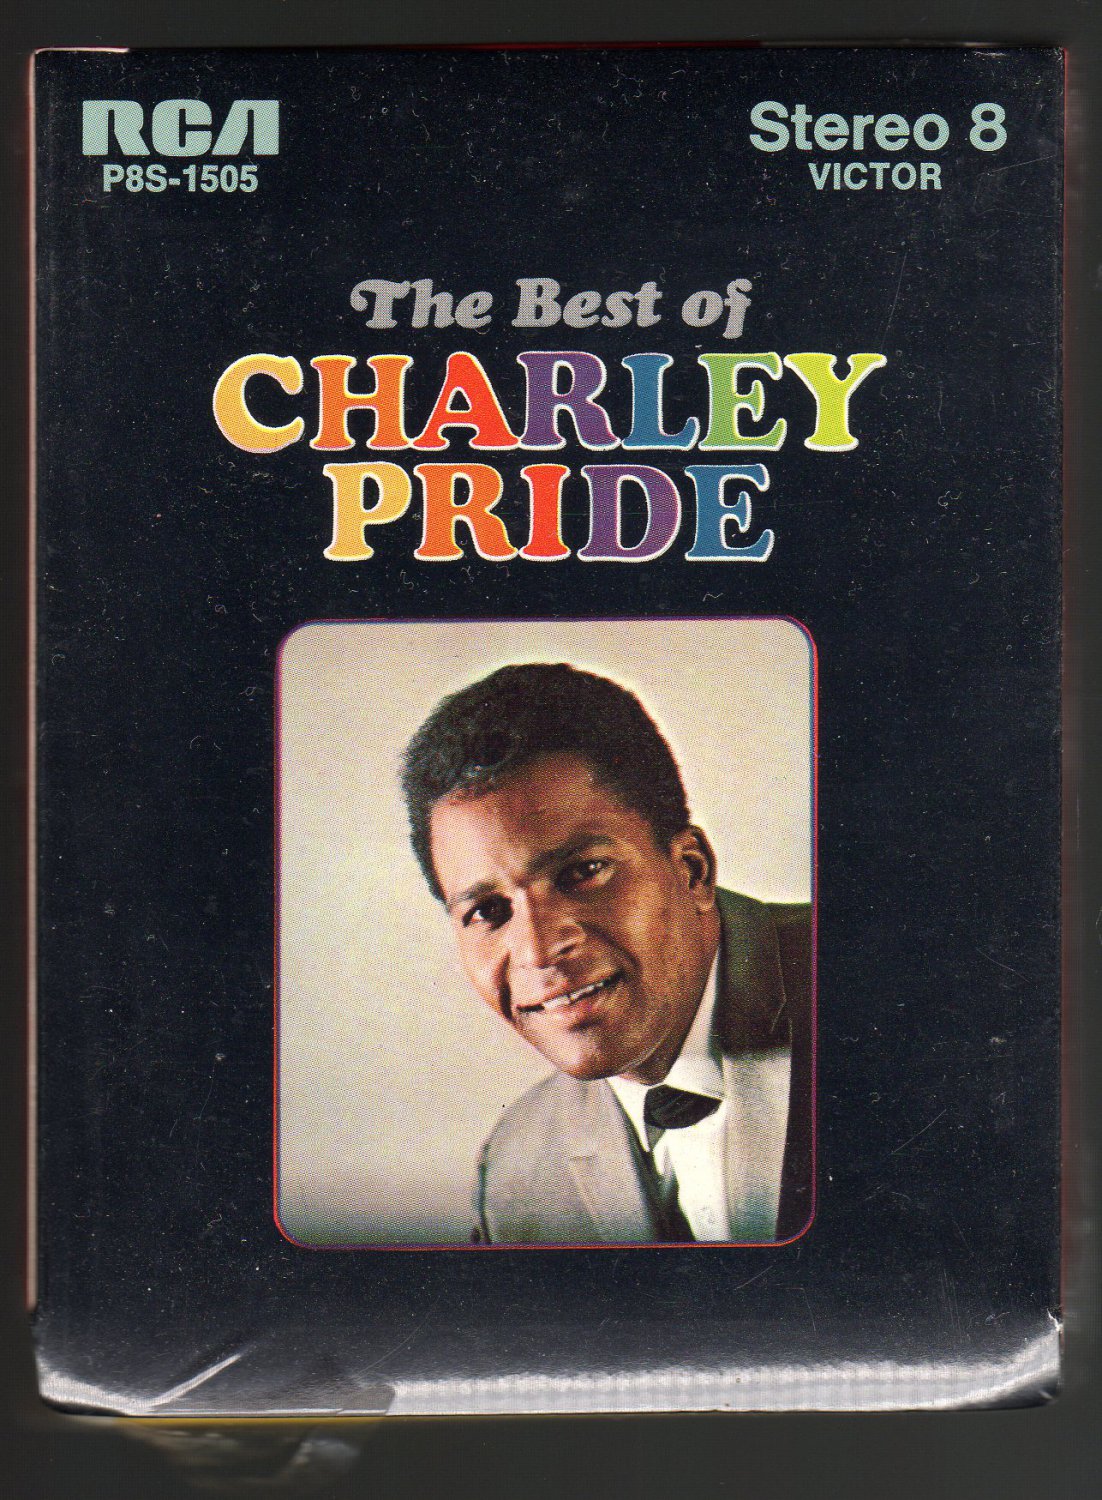 Charley Pride The Best Of Charley Pride 1969 RCA Sealed A23 8TRACK TAPE